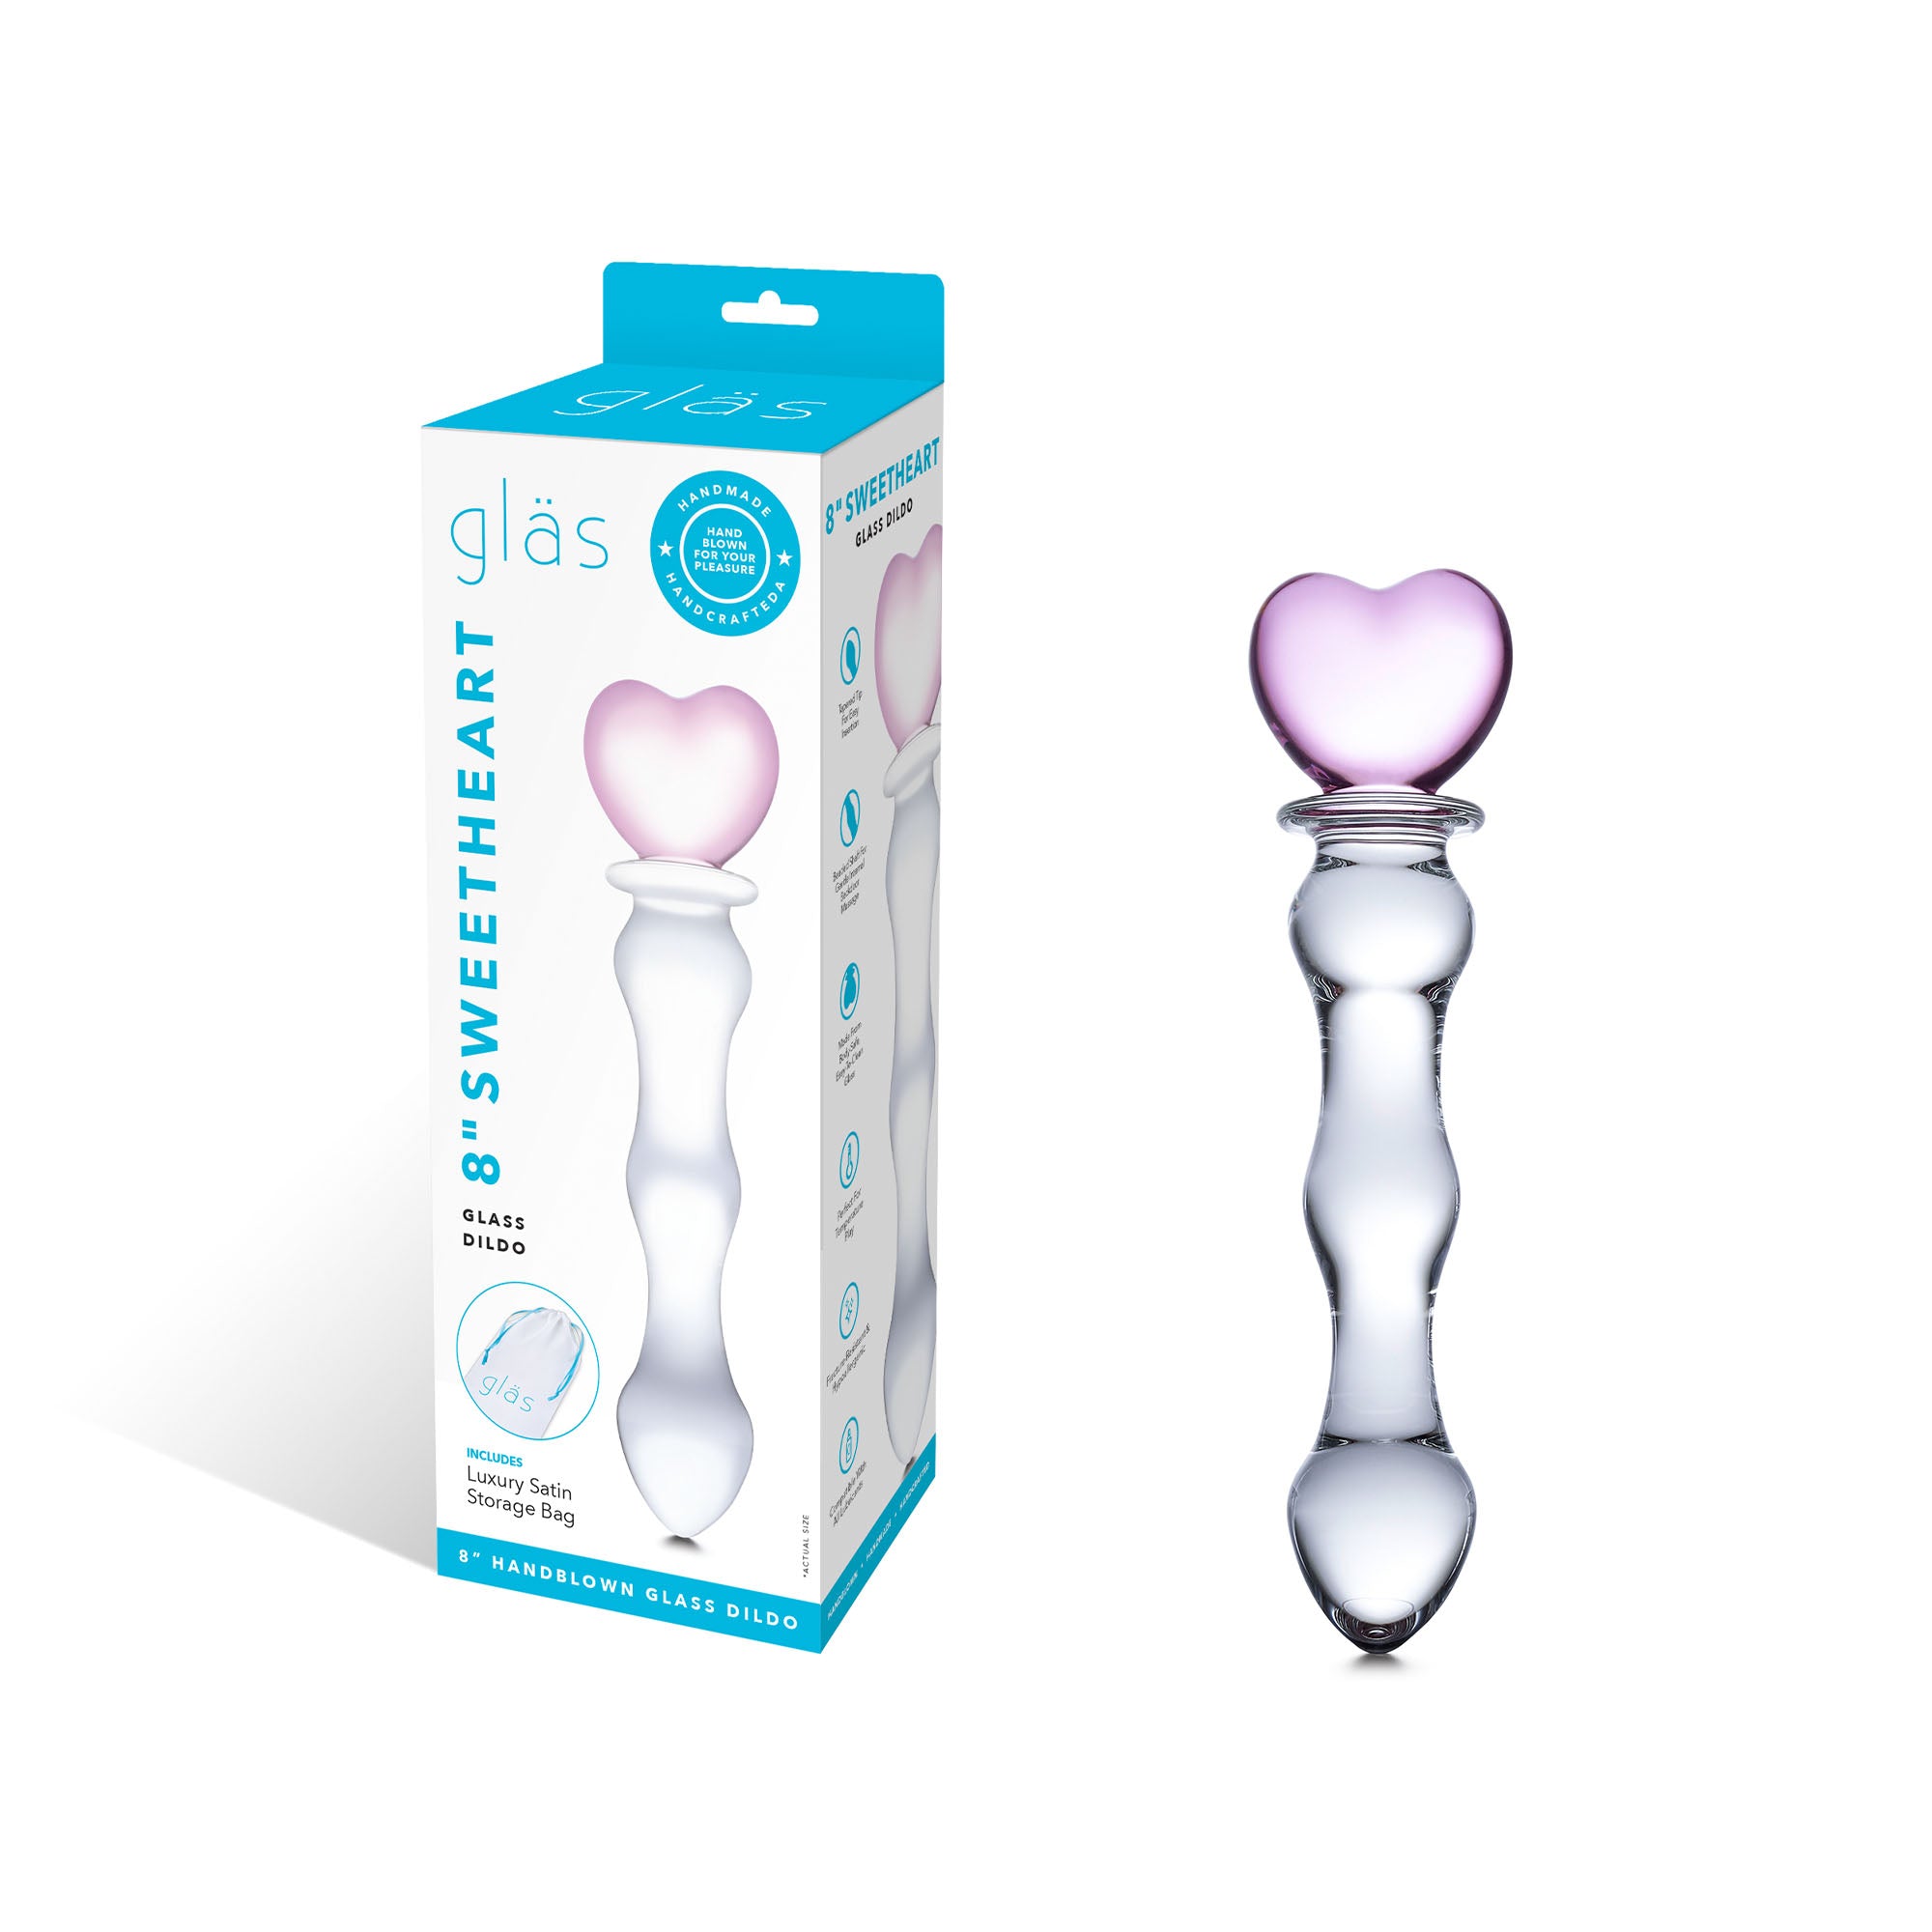 Packaging of the 8 inch Sweetheart Glass Dildo